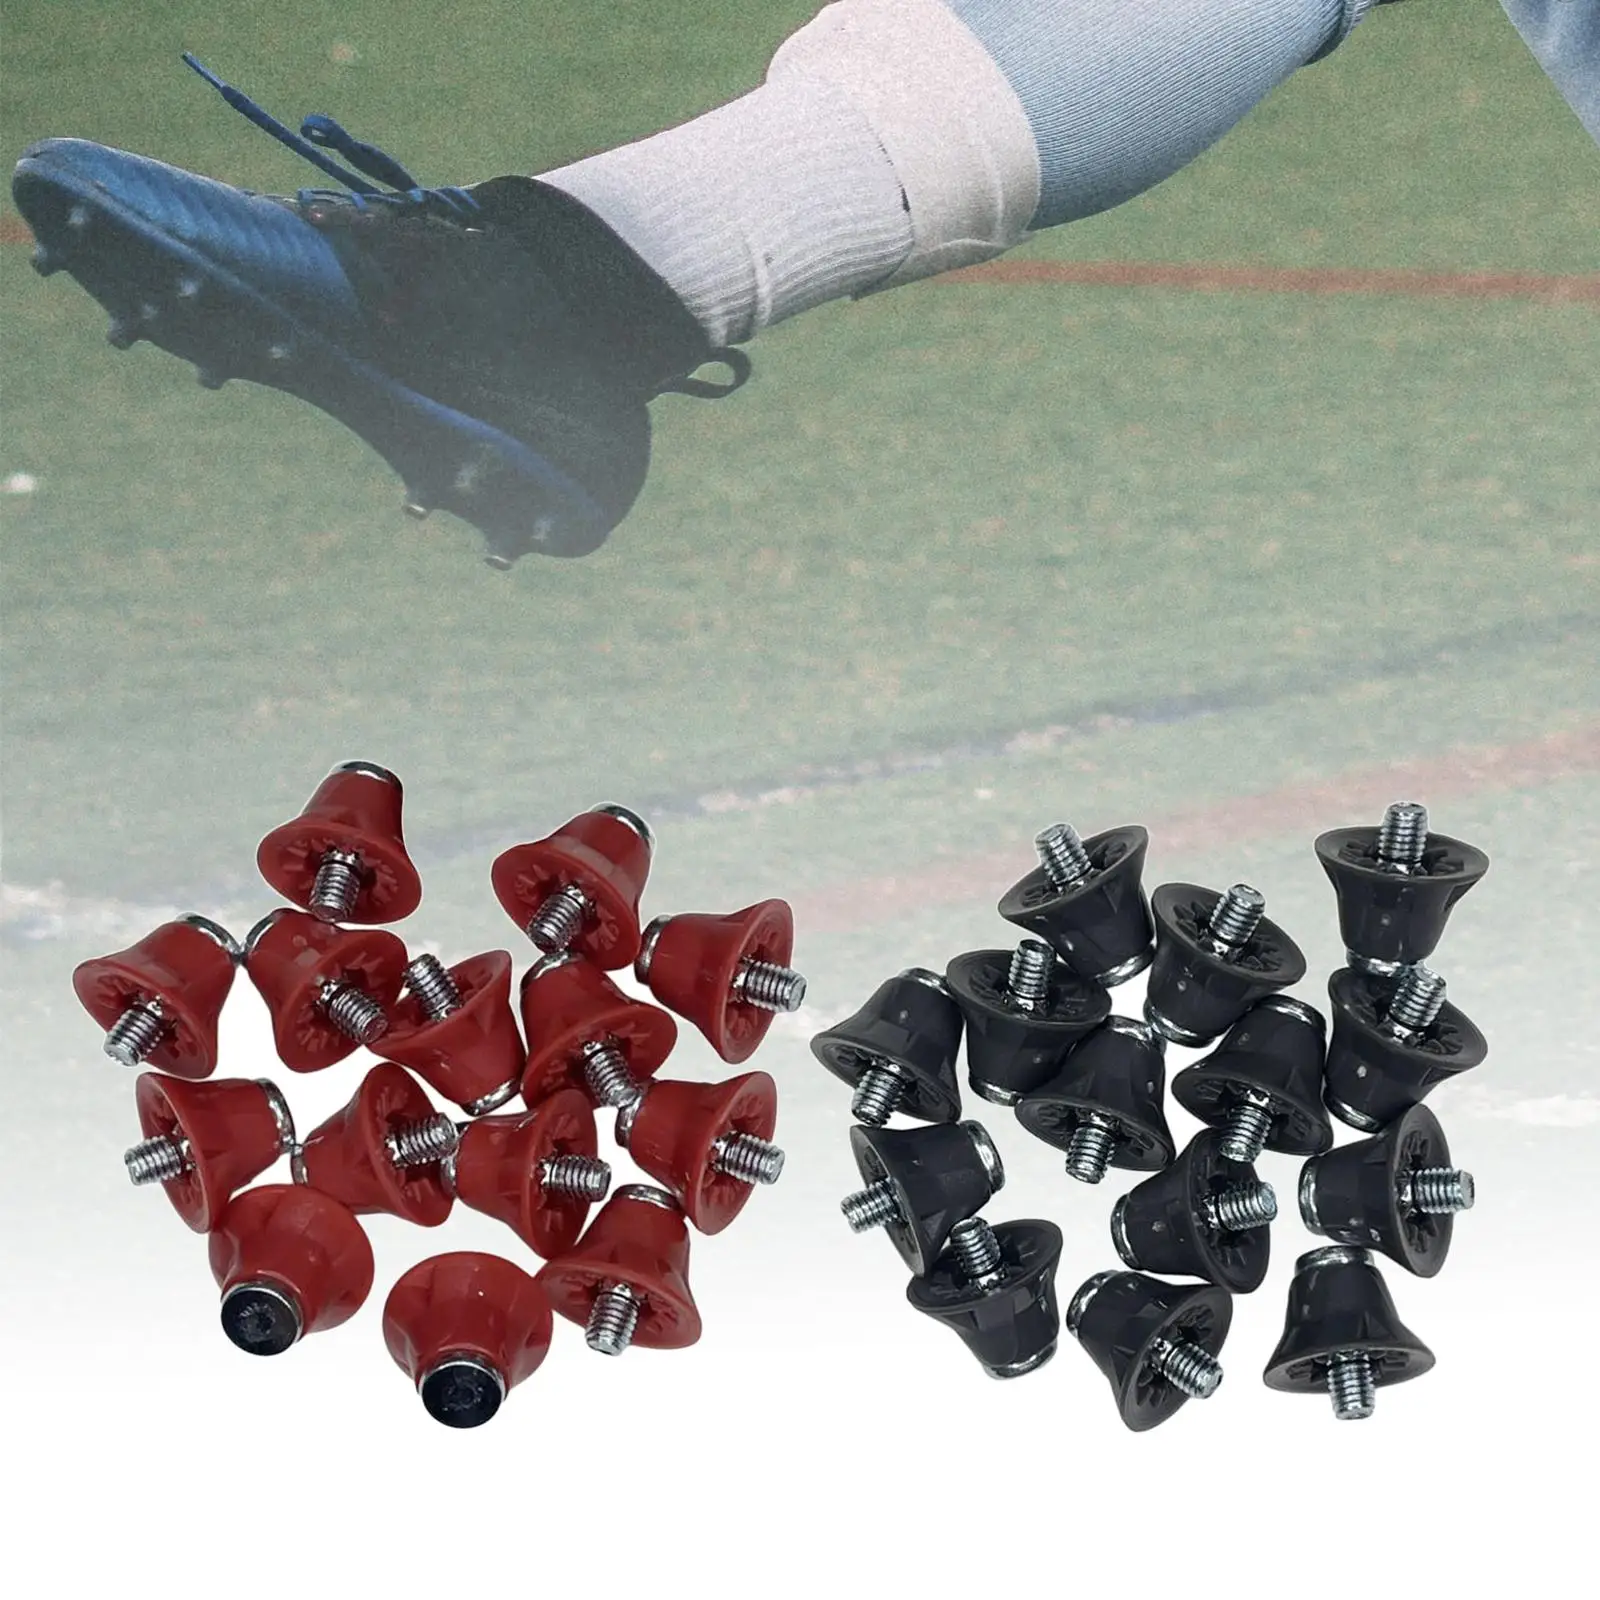 14Pcs Rugby Studs Replacement Spikes M5 Threaded Turf Football Boot Spikes Soccer Shoe Spikes for Athletic Sneakers Training